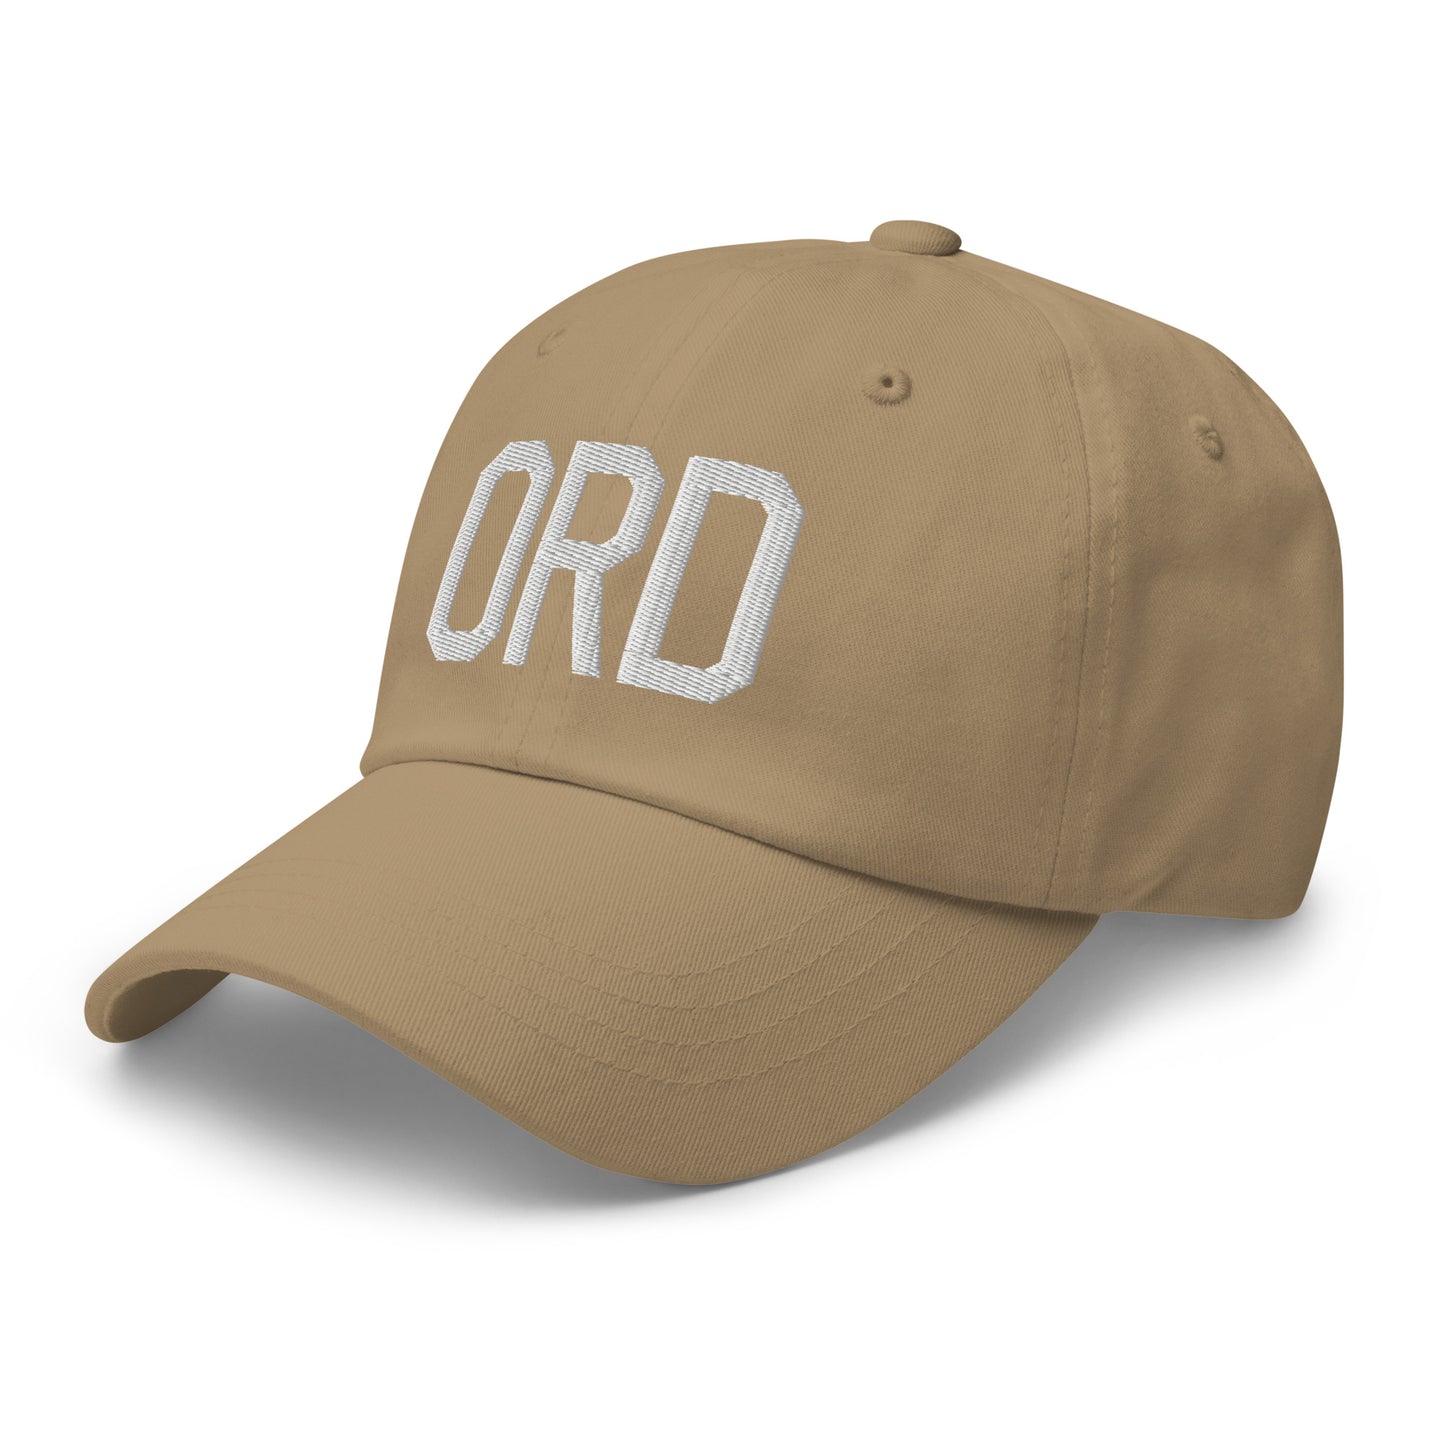 Airport Code Baseball Cap - White • ORD Chicago • YHM Designs - Image 24